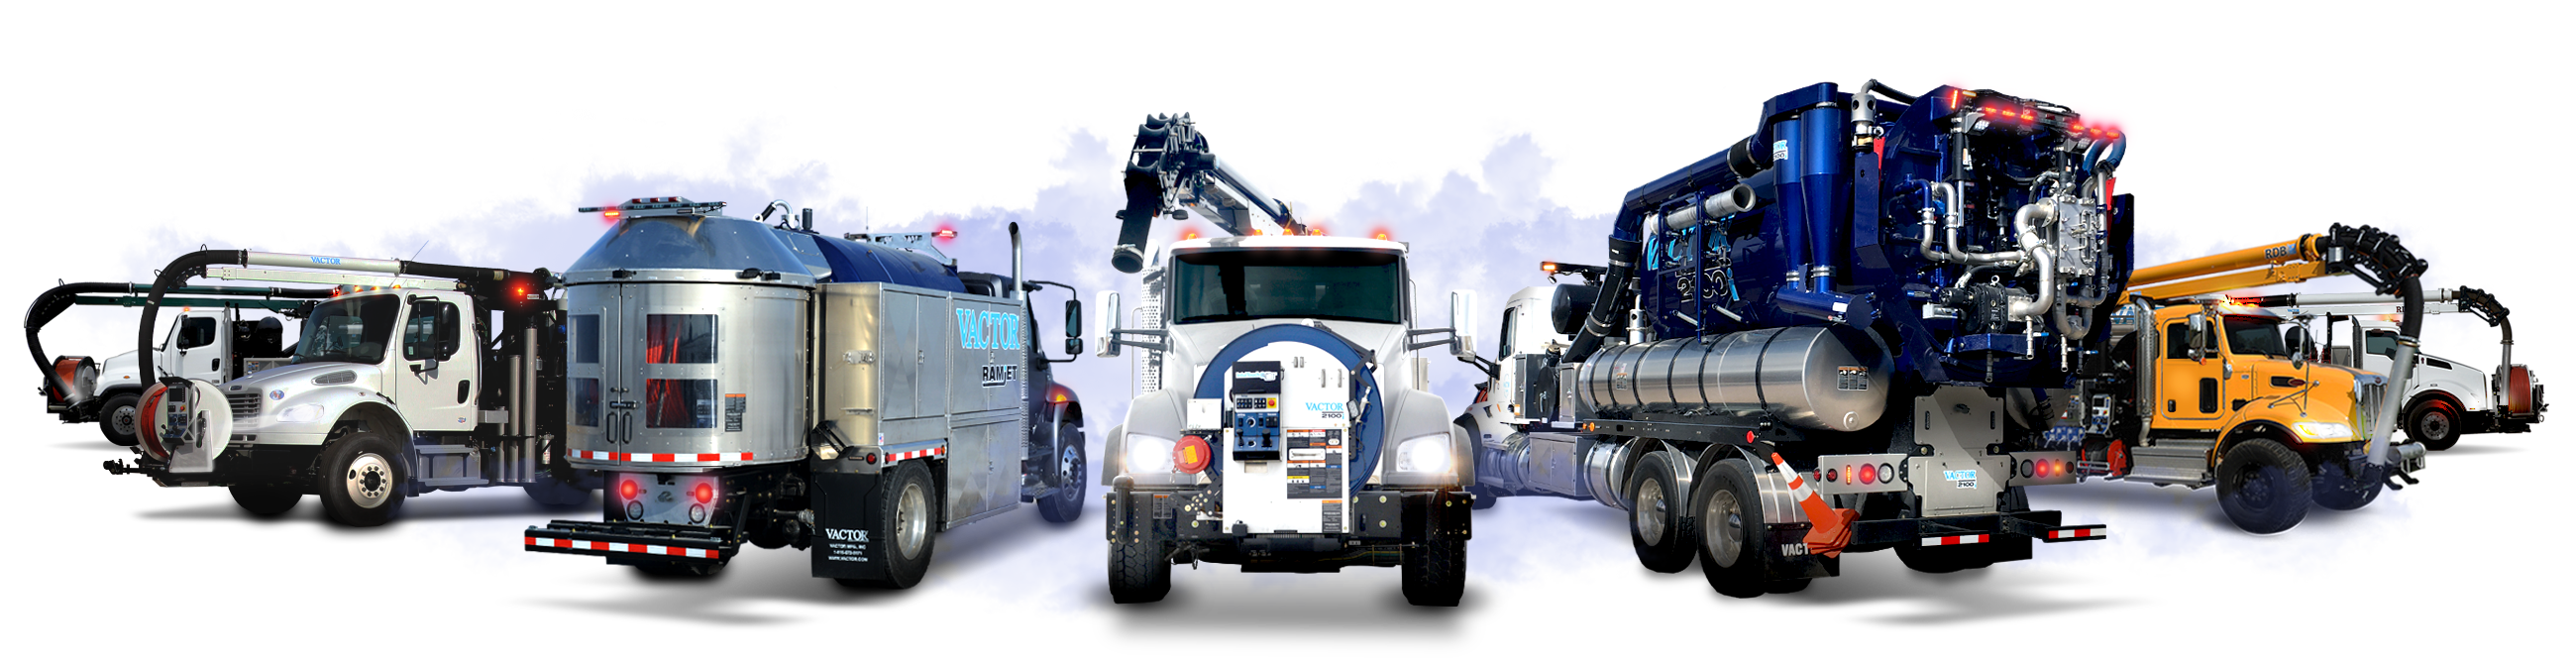 Vactor Sewer Cleaning Equipment